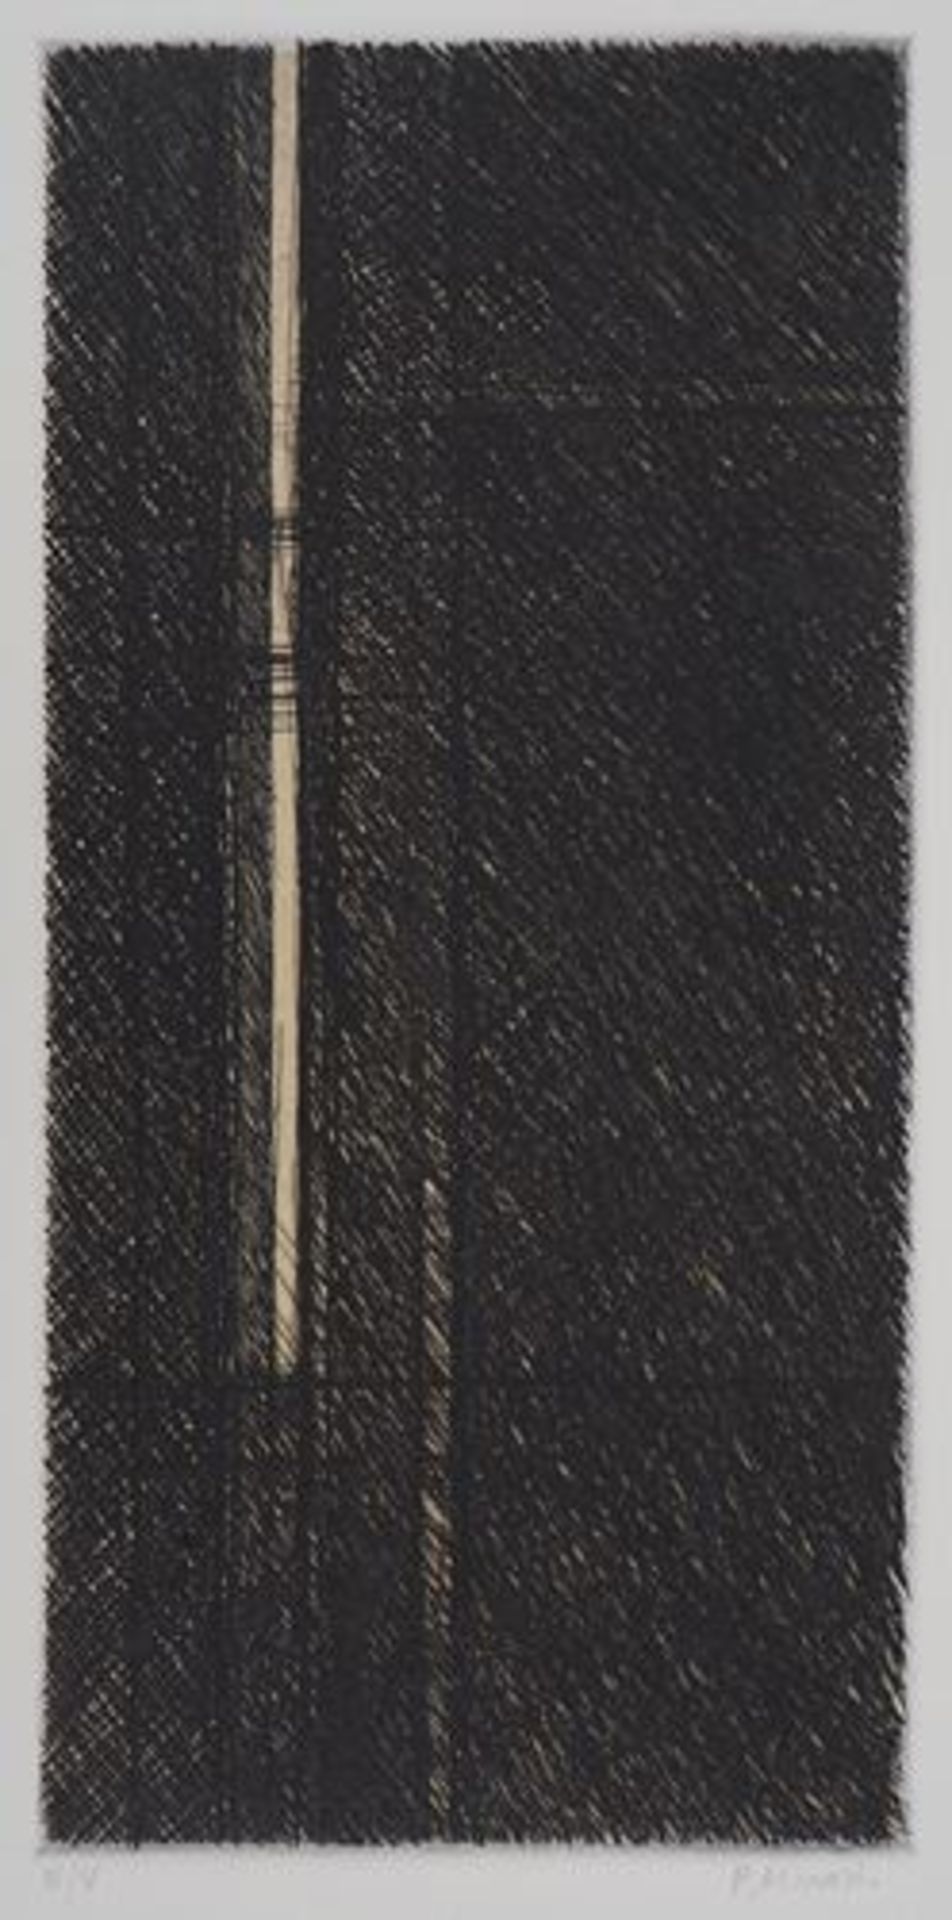 Philippe MINARD Linear Composition Original engraving on Vellum Signed in pencil [...]